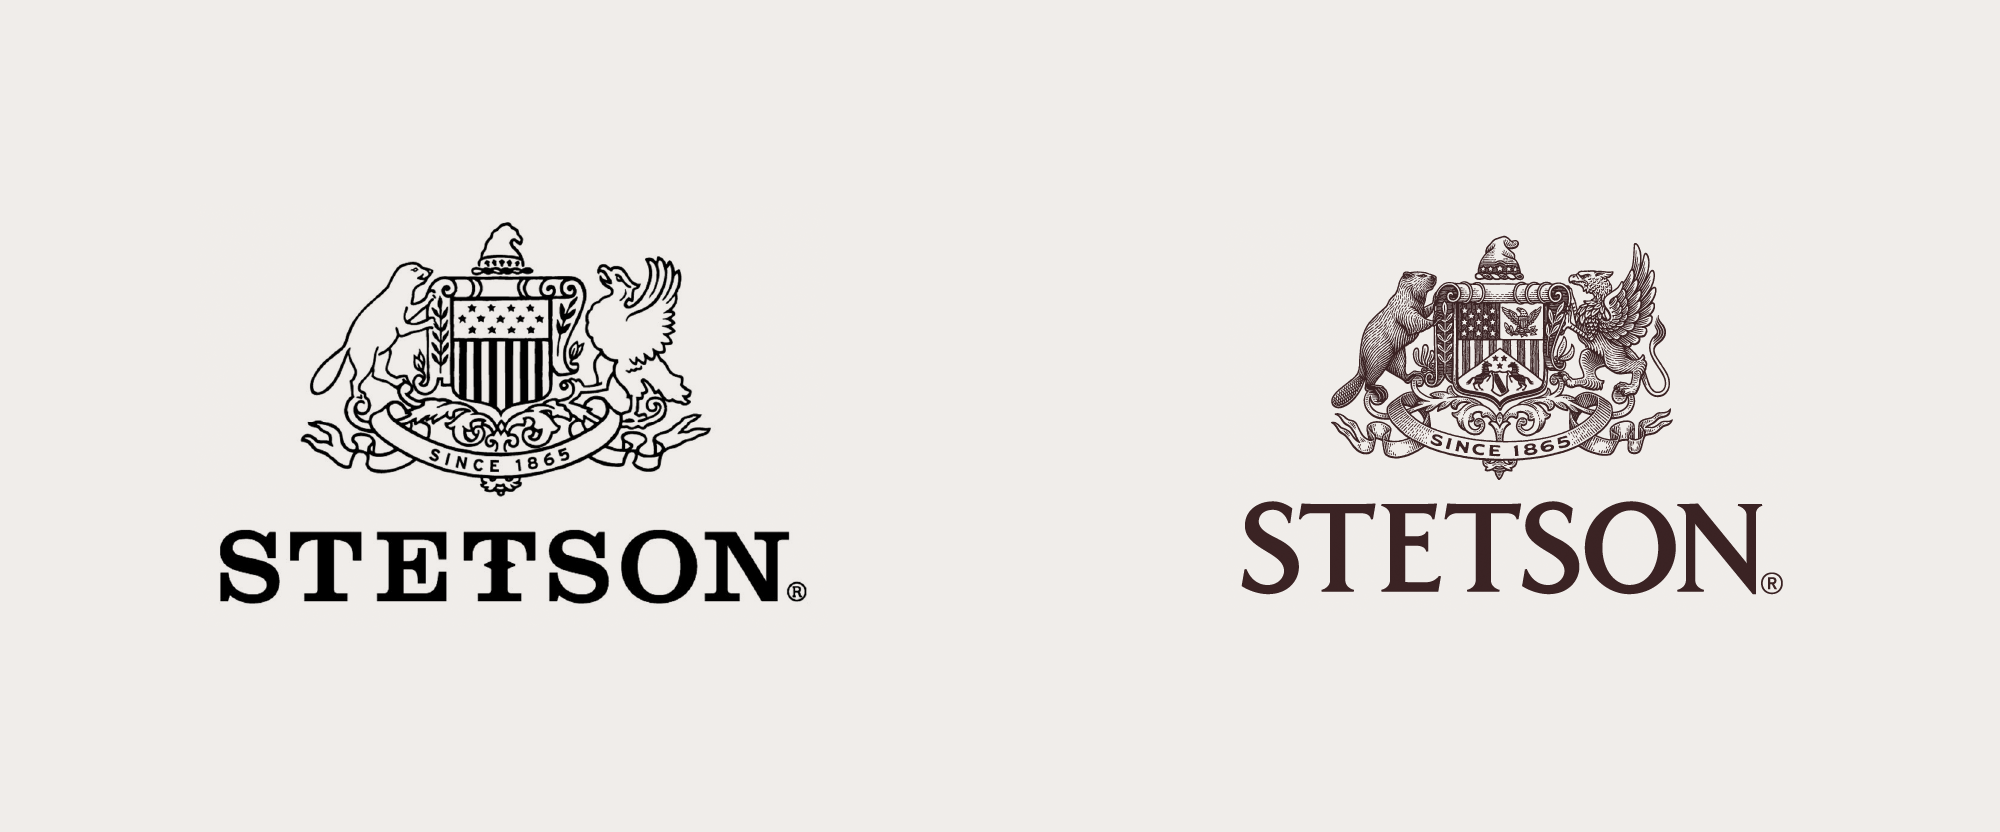 Brand New: New Logo and Identity for Stetson by Tractorbeam